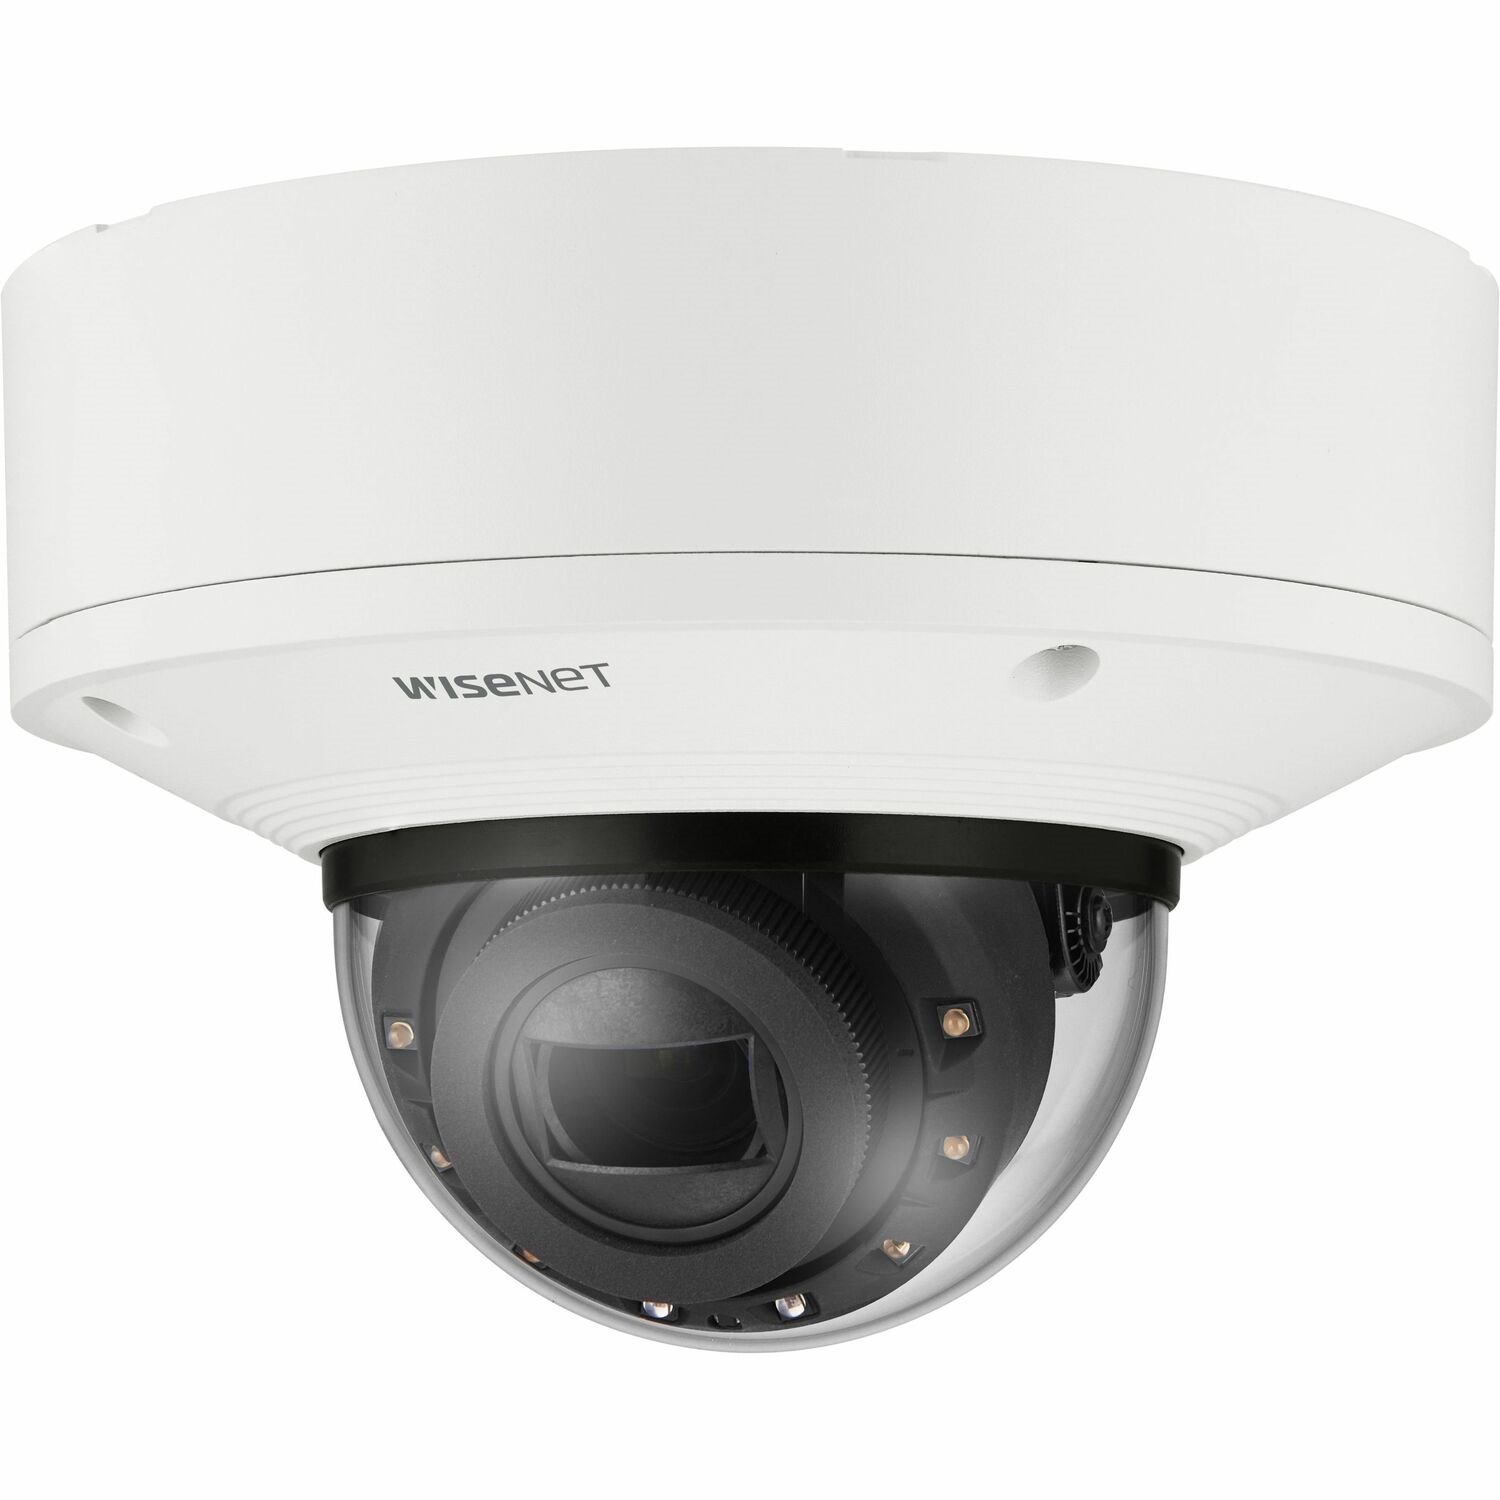 Wisenet XNV-9083R Outdoor 4K Network Camera - Color - Dome - White - TAA Compliant